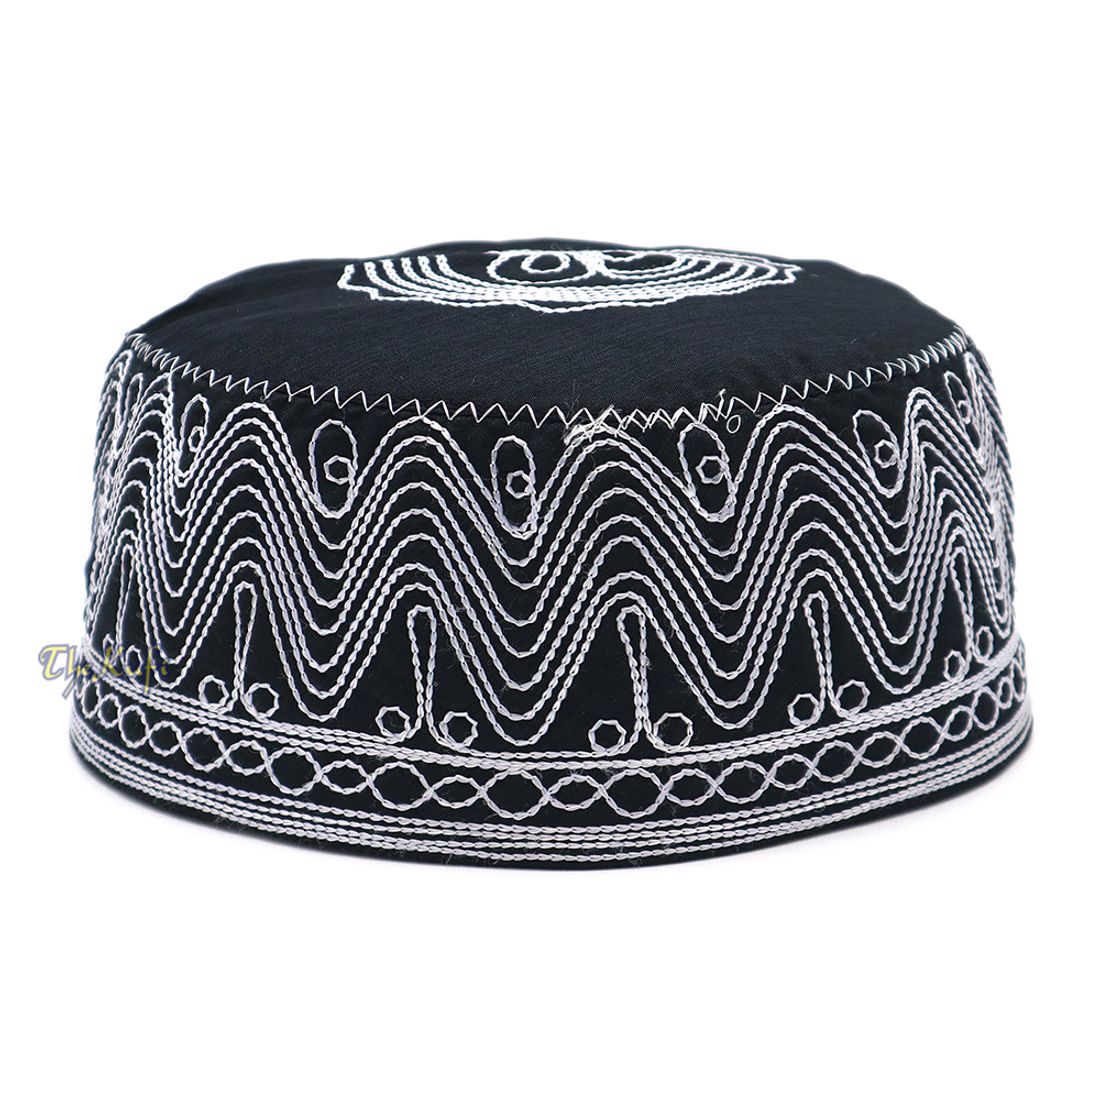 Islamic Kufi Hat | 3″ Tall Handcrafted Cotton-blend Cap with Black & Silver Embroidery